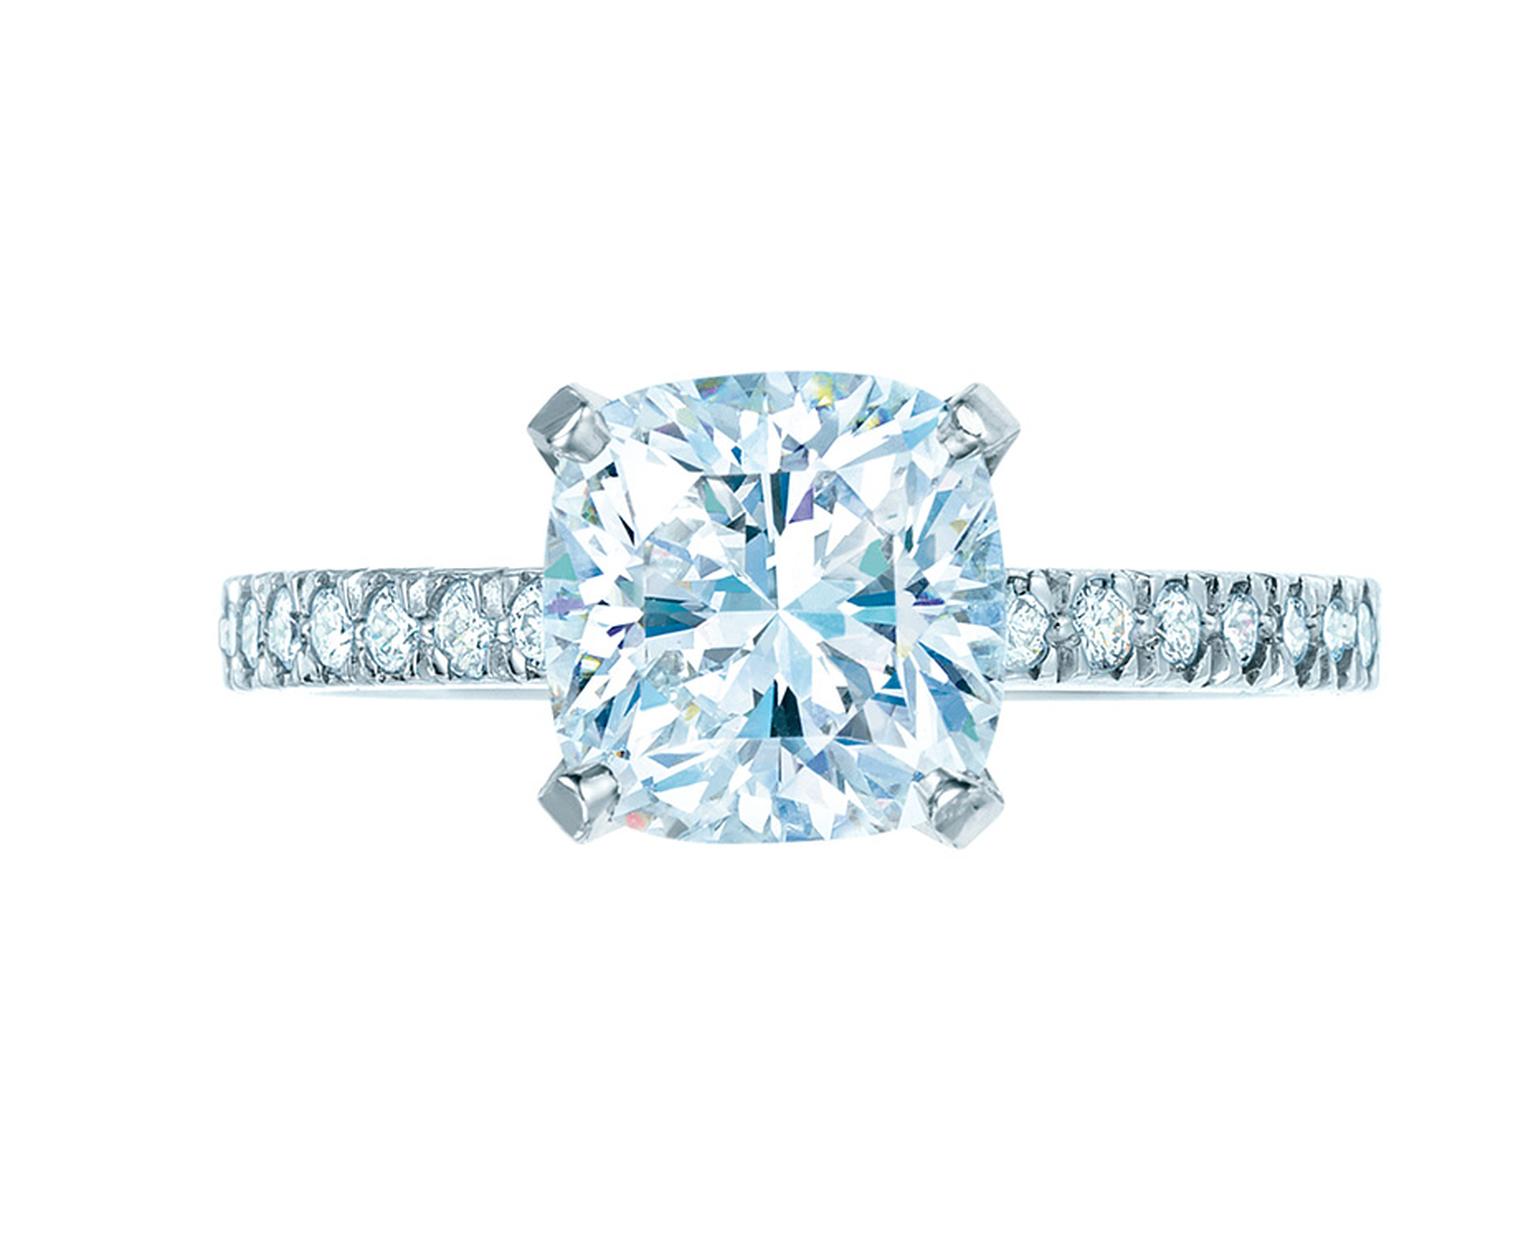 Tiffany & Co. showcases its signature Novo cut in this stunning diamond engagement ring.